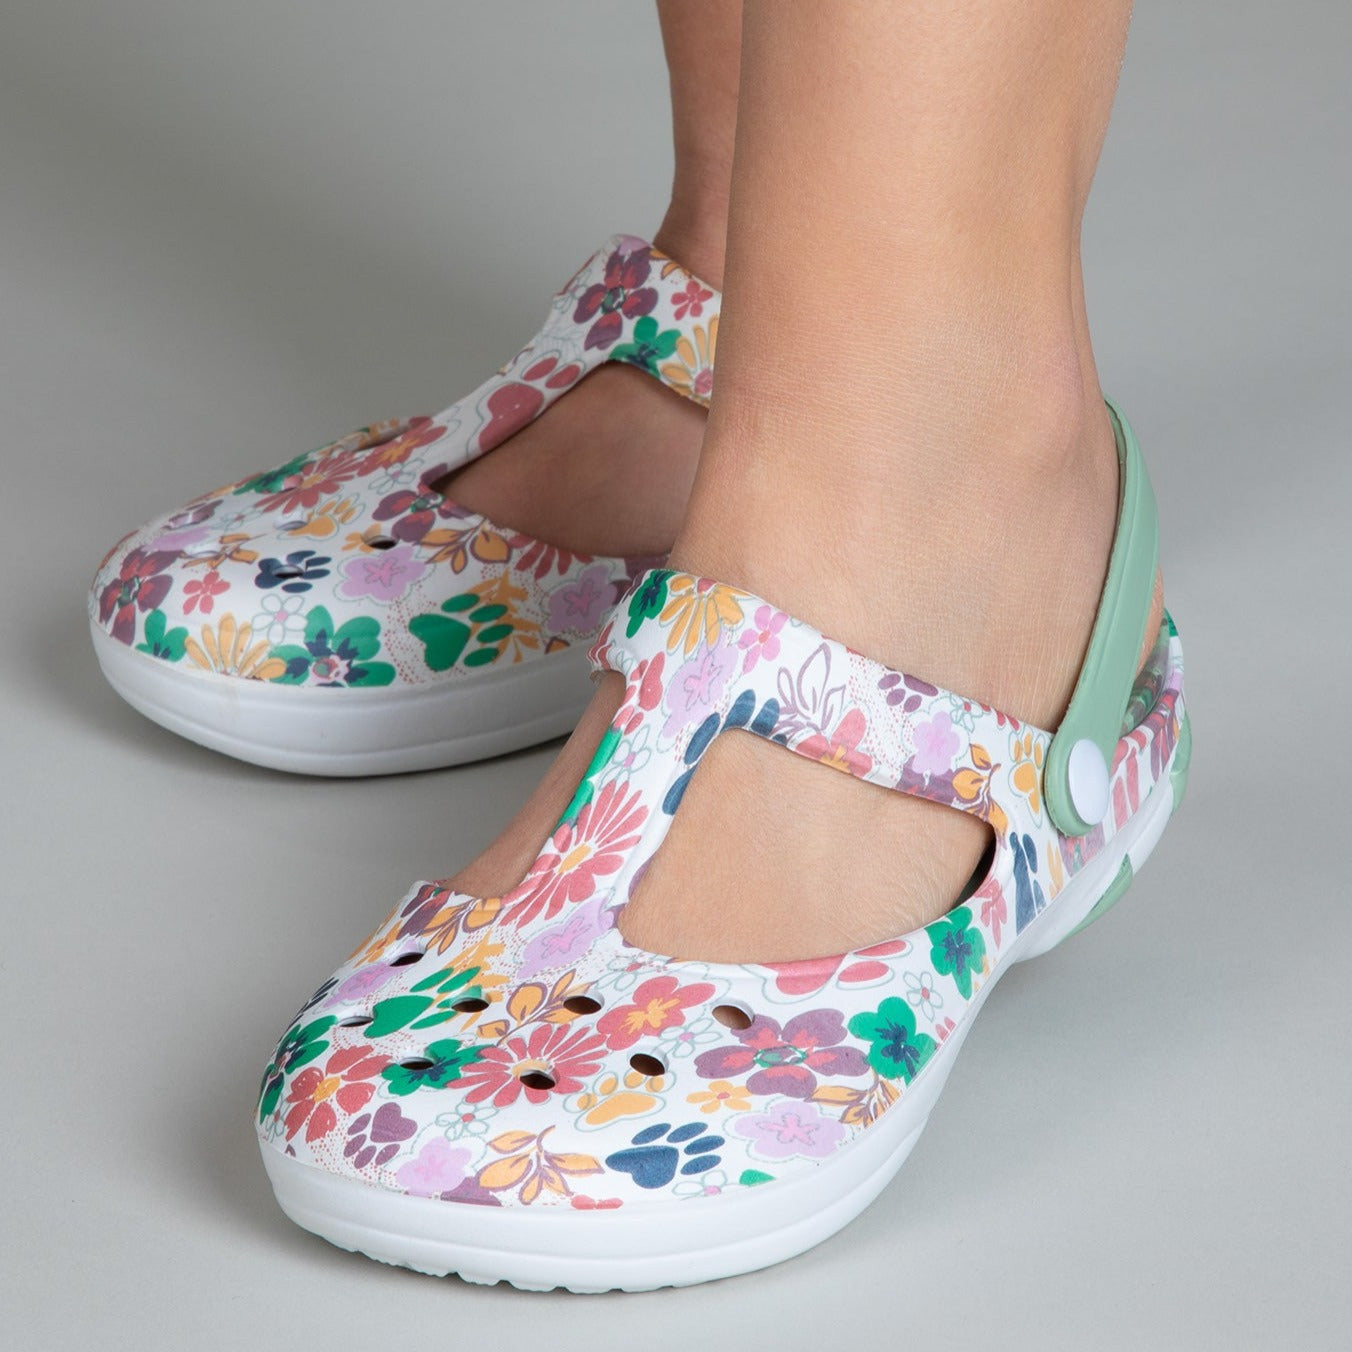 Multicolored Mary Jane Clogs - Flowers & Paws - 9